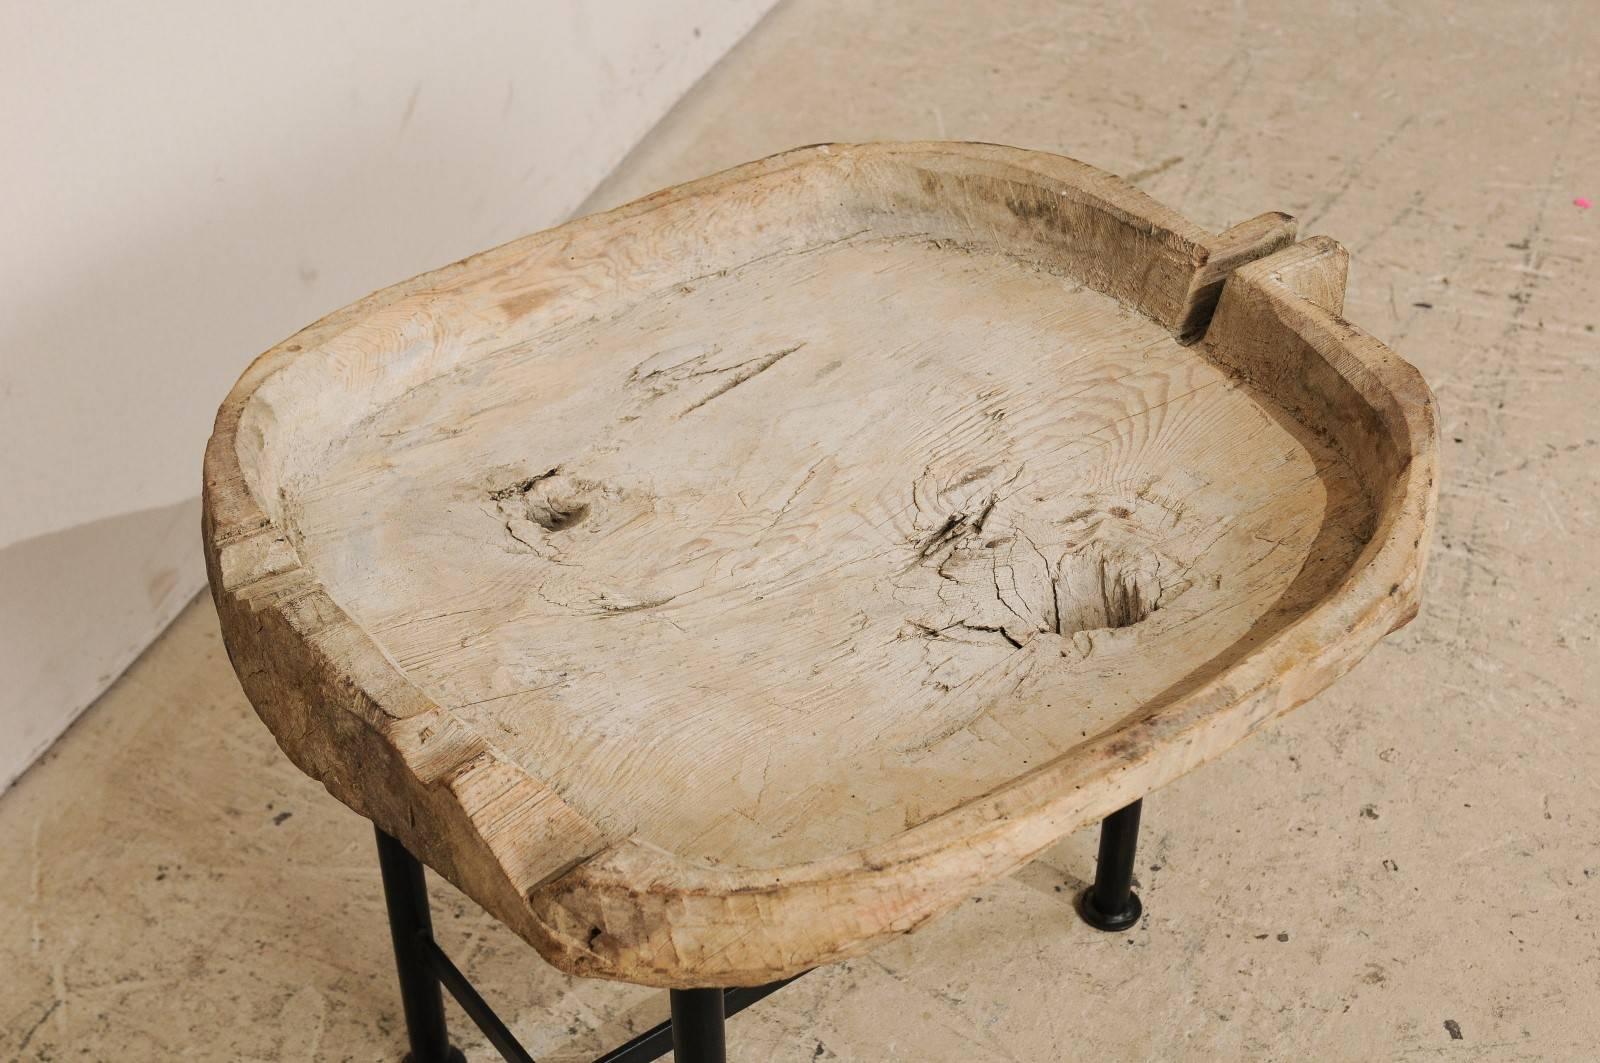 19th Century Spanish Wood Trough Likely Used for Cheese Production Turned Rustic Coffee Table